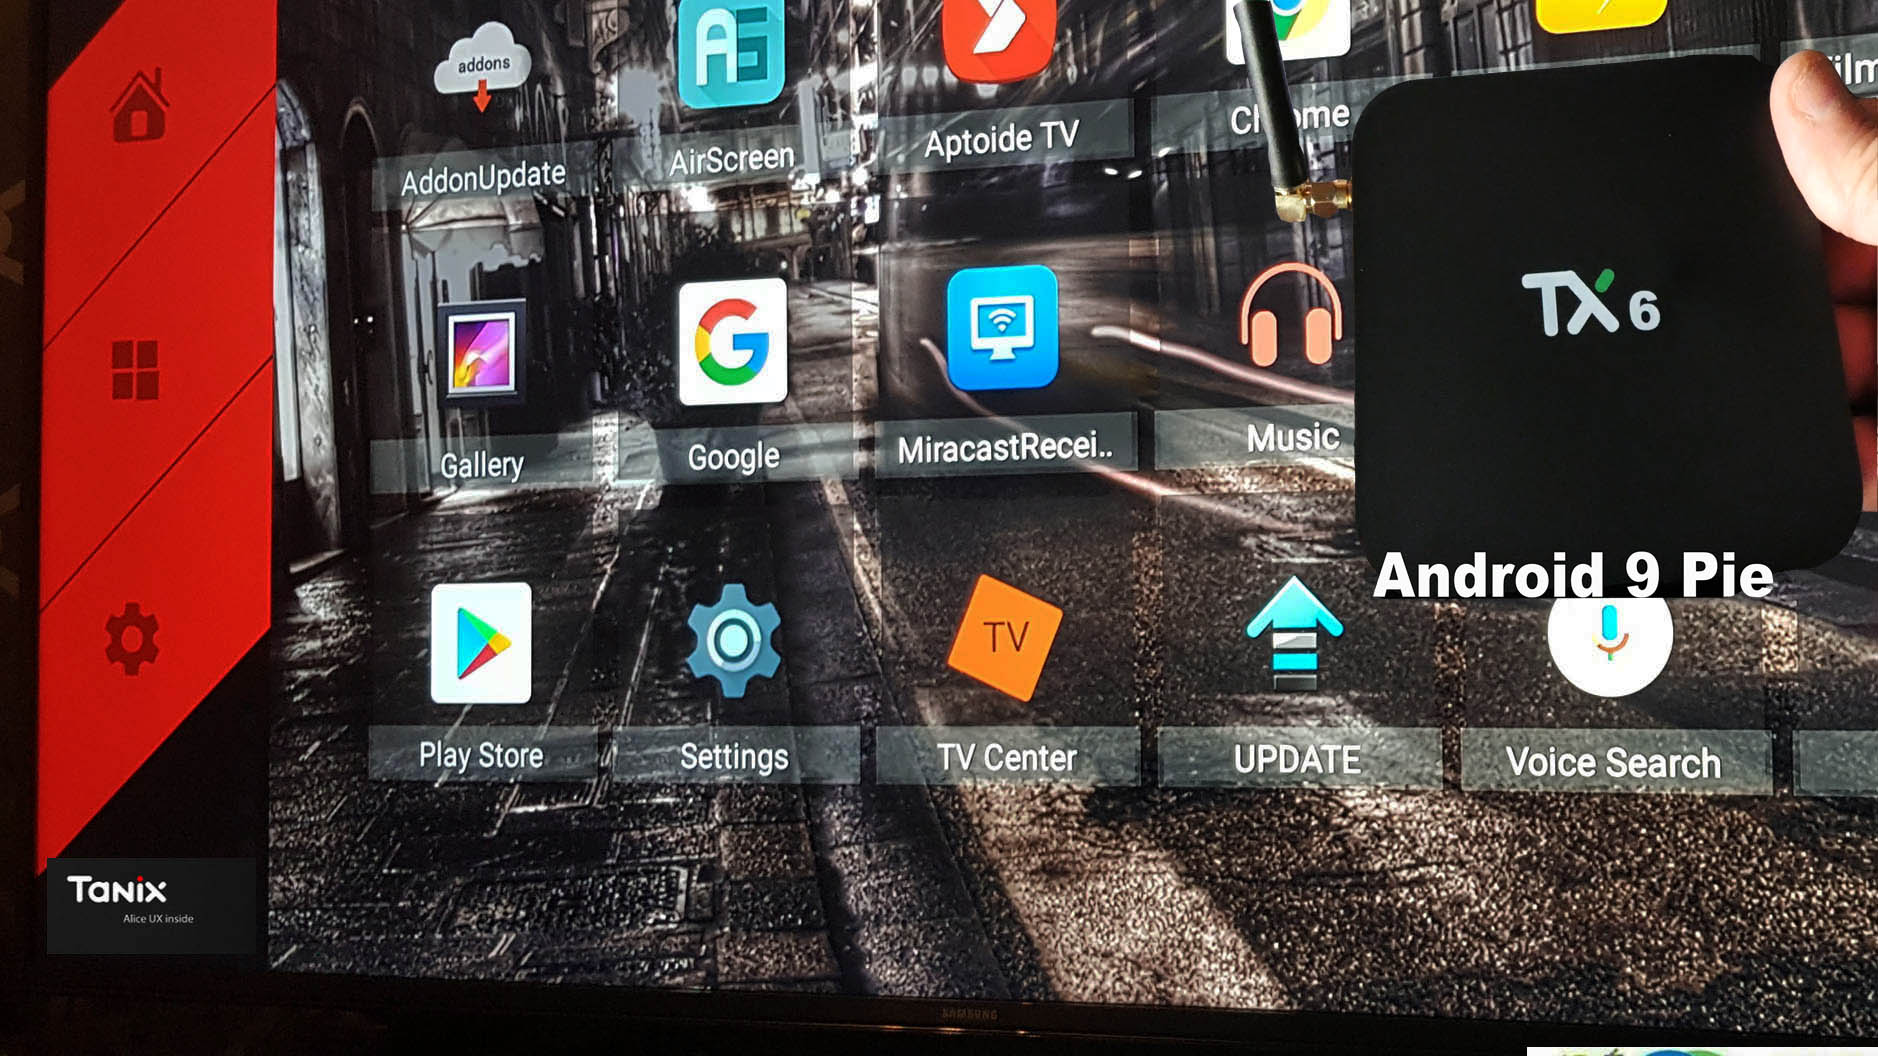 Android 9 with Alice UX google play 2019